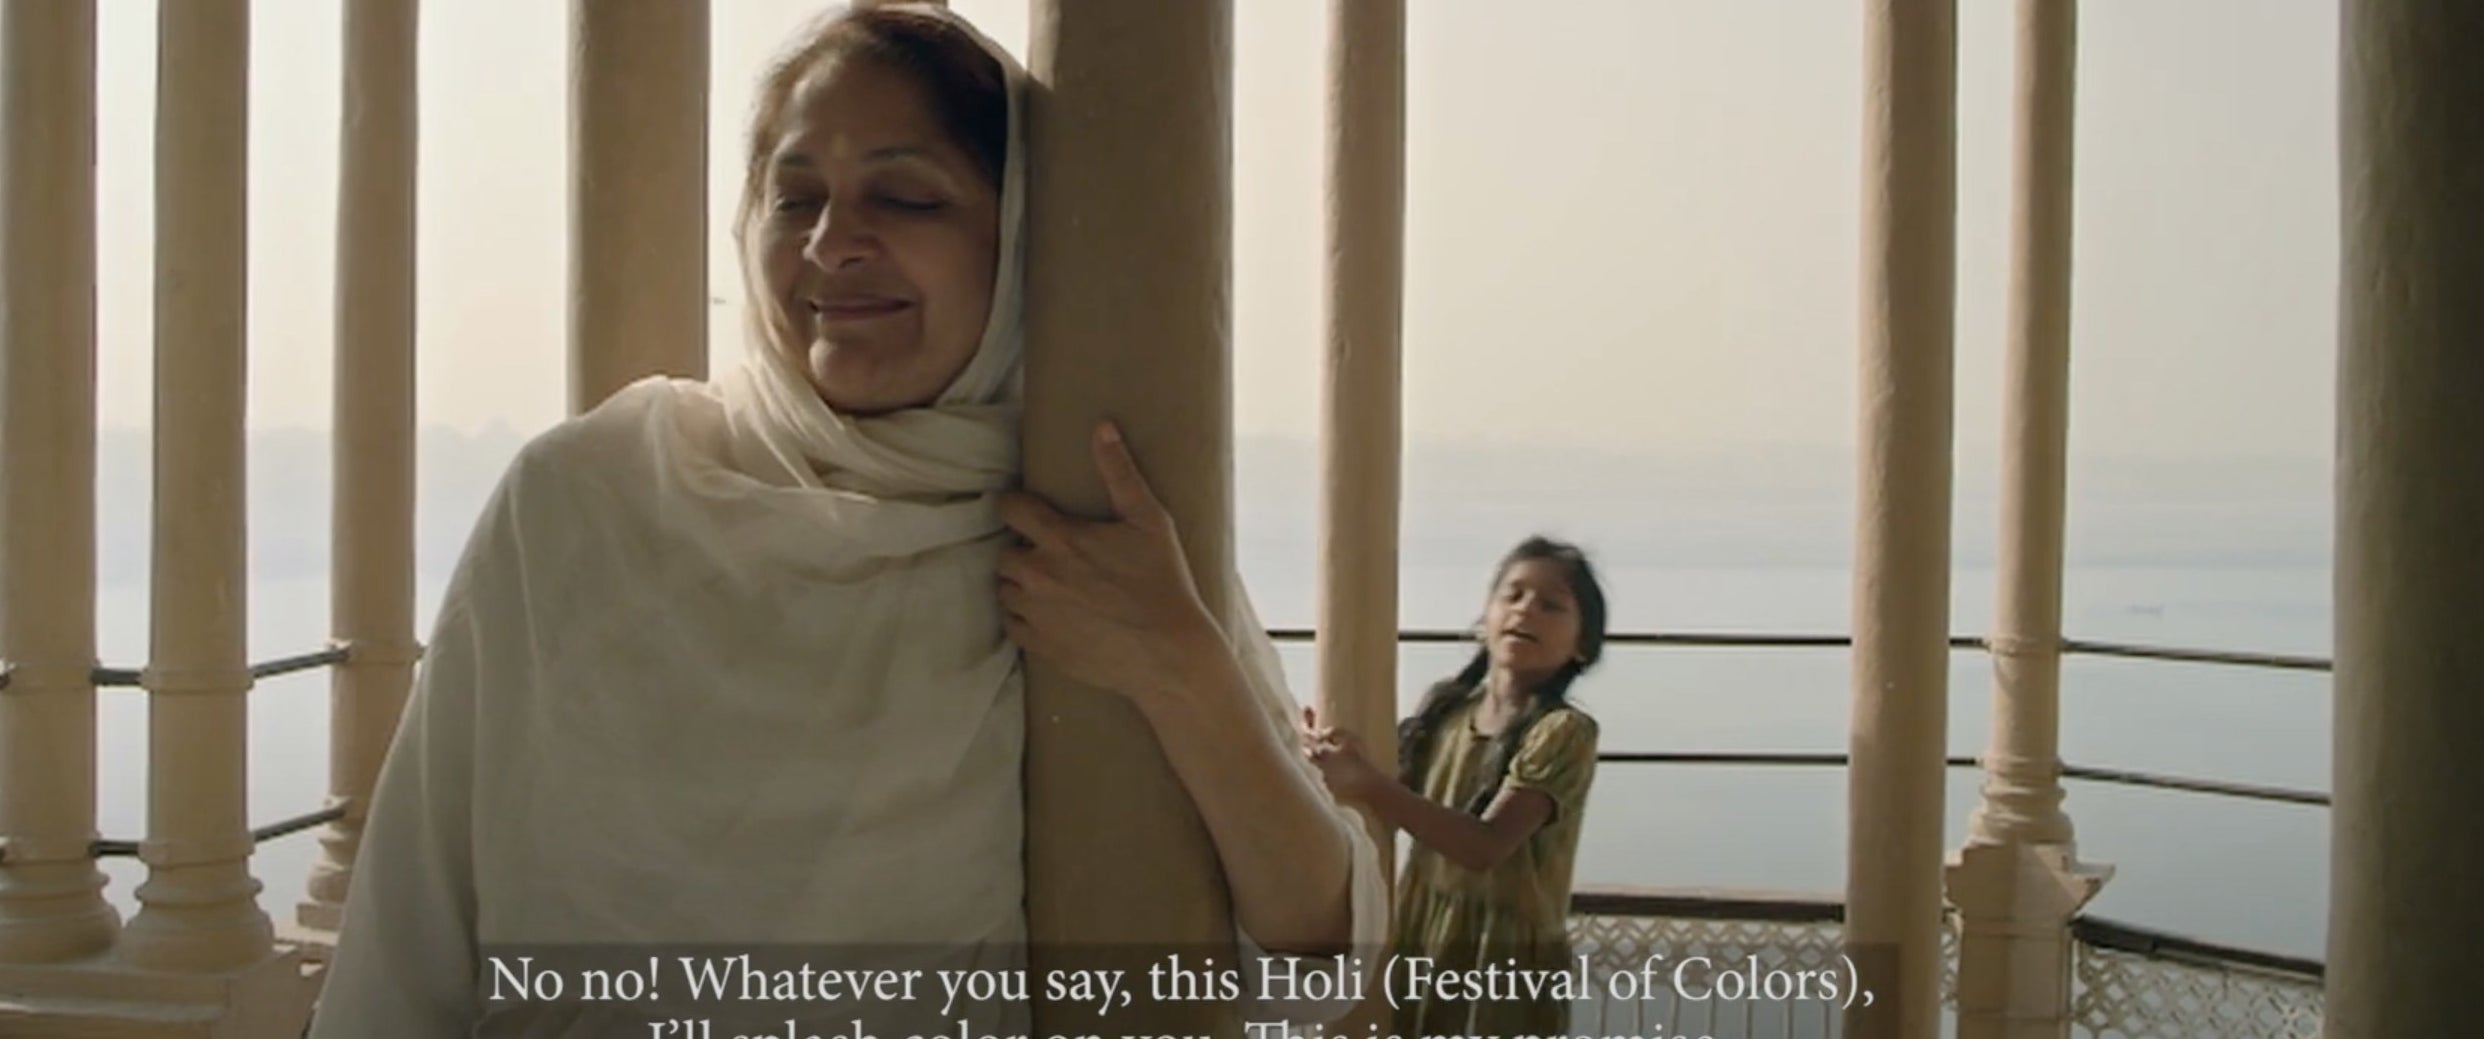 Neena Gupta and Aqsa Siddiqui conversing in a still from the film